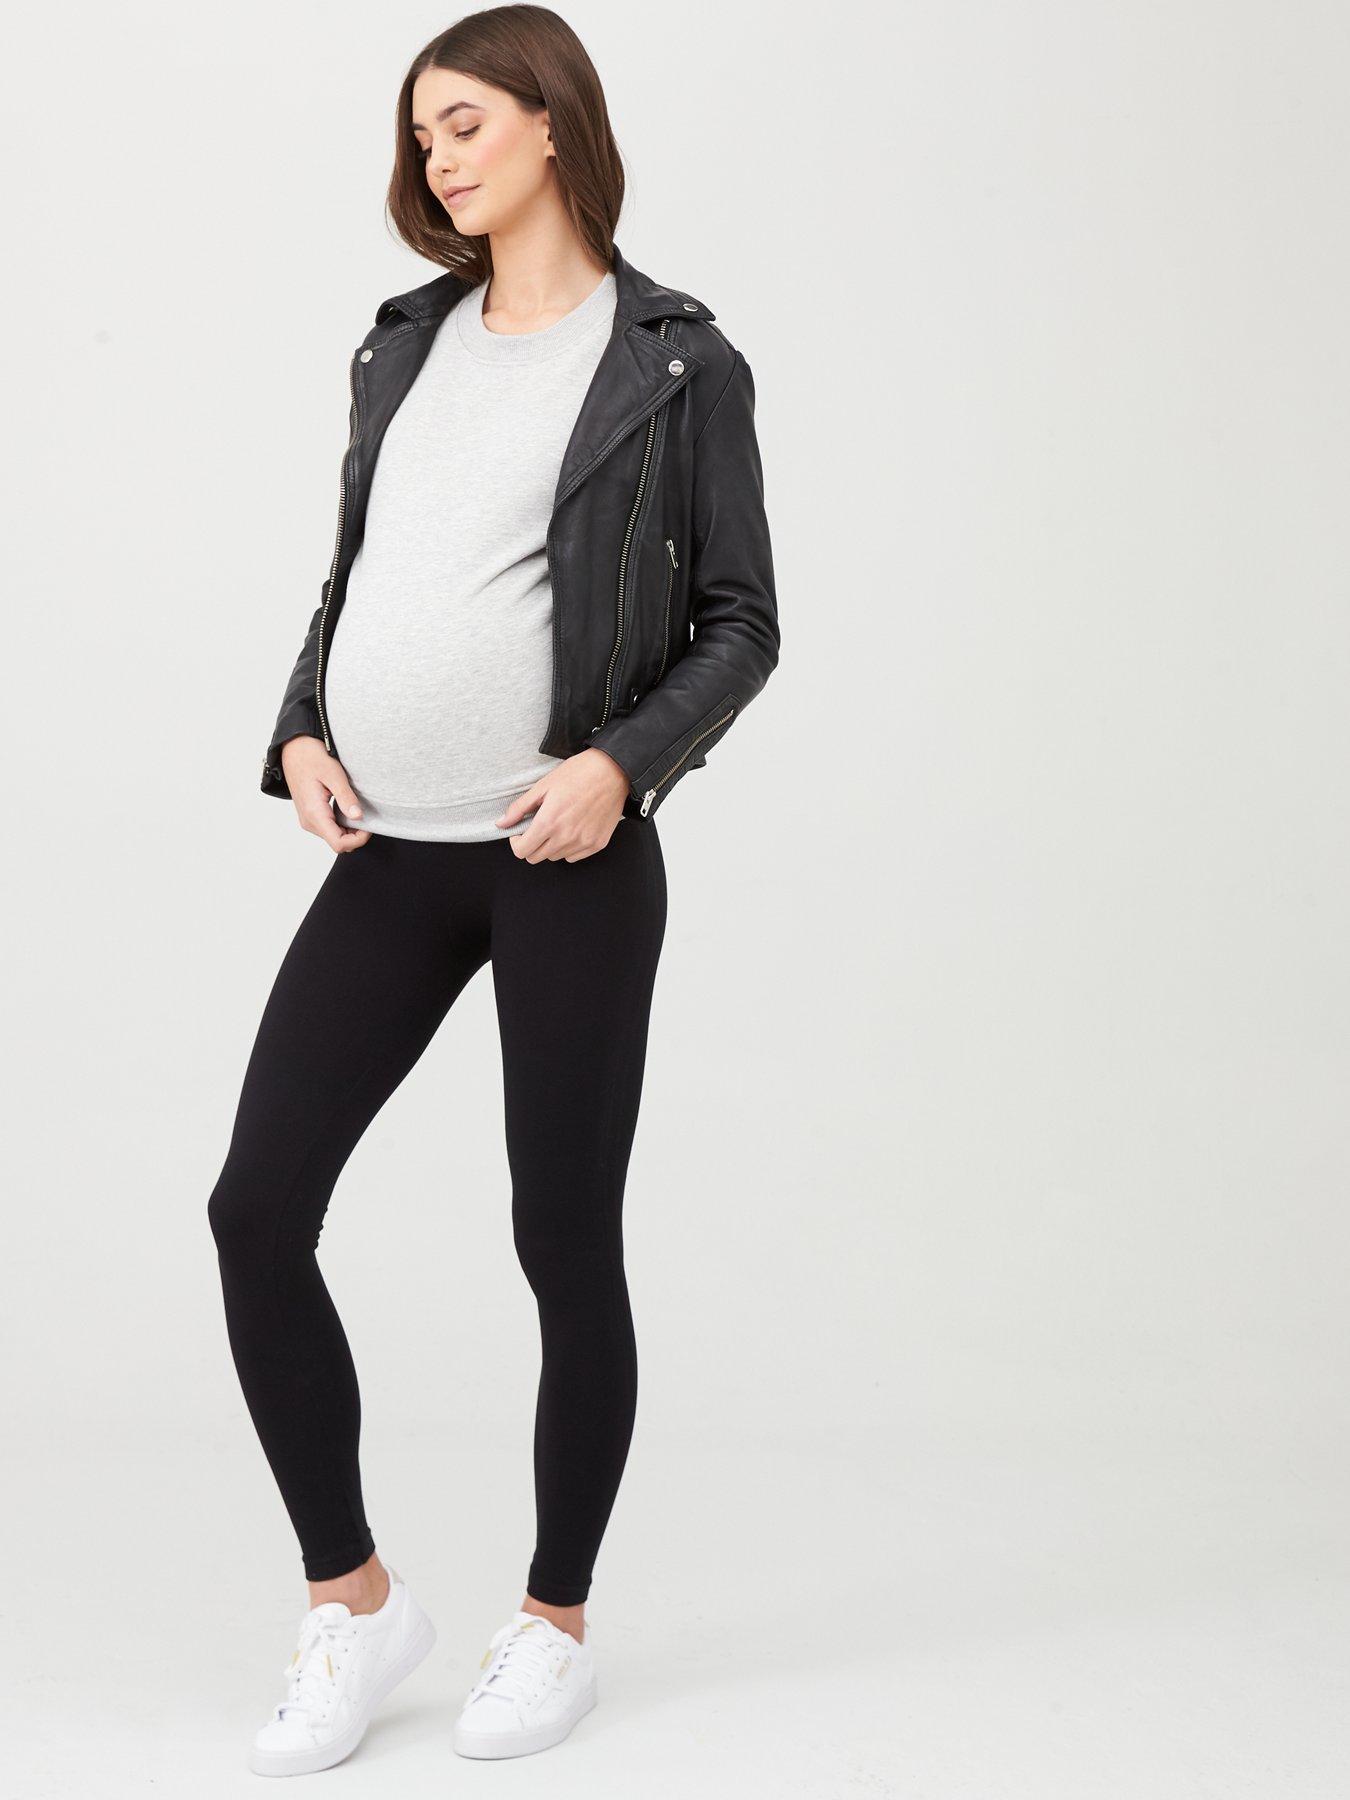 12 Petite Maternity Clothes | Poor Little It Girl